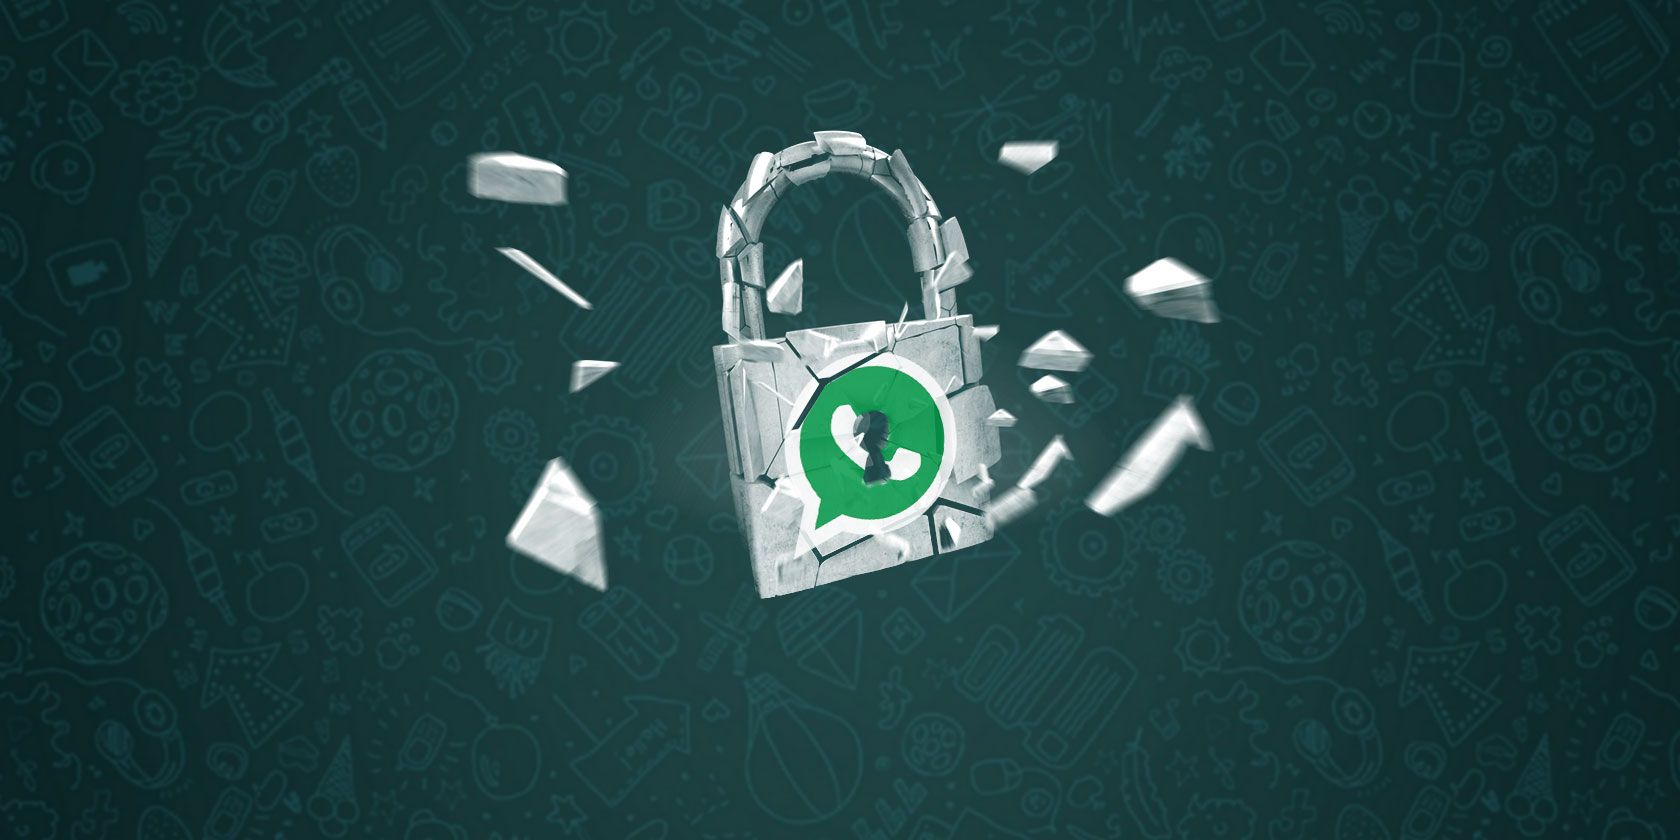 How to Make WhatsApp More Secure and Private: 8 Tips